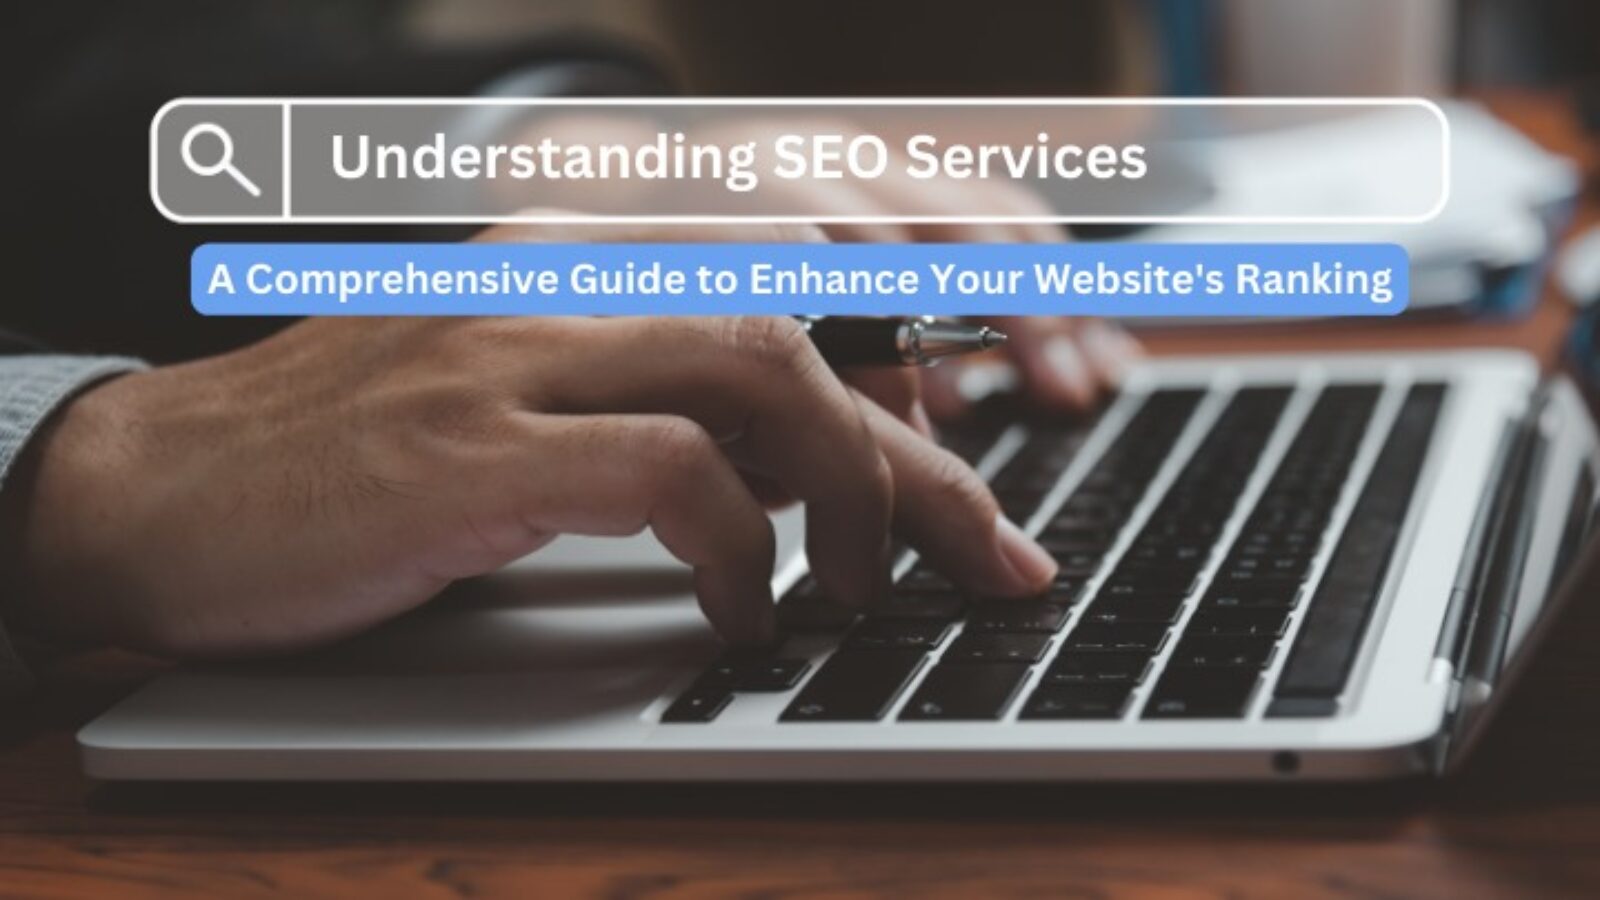 SEO Services Guide: Enhance Website Ranking